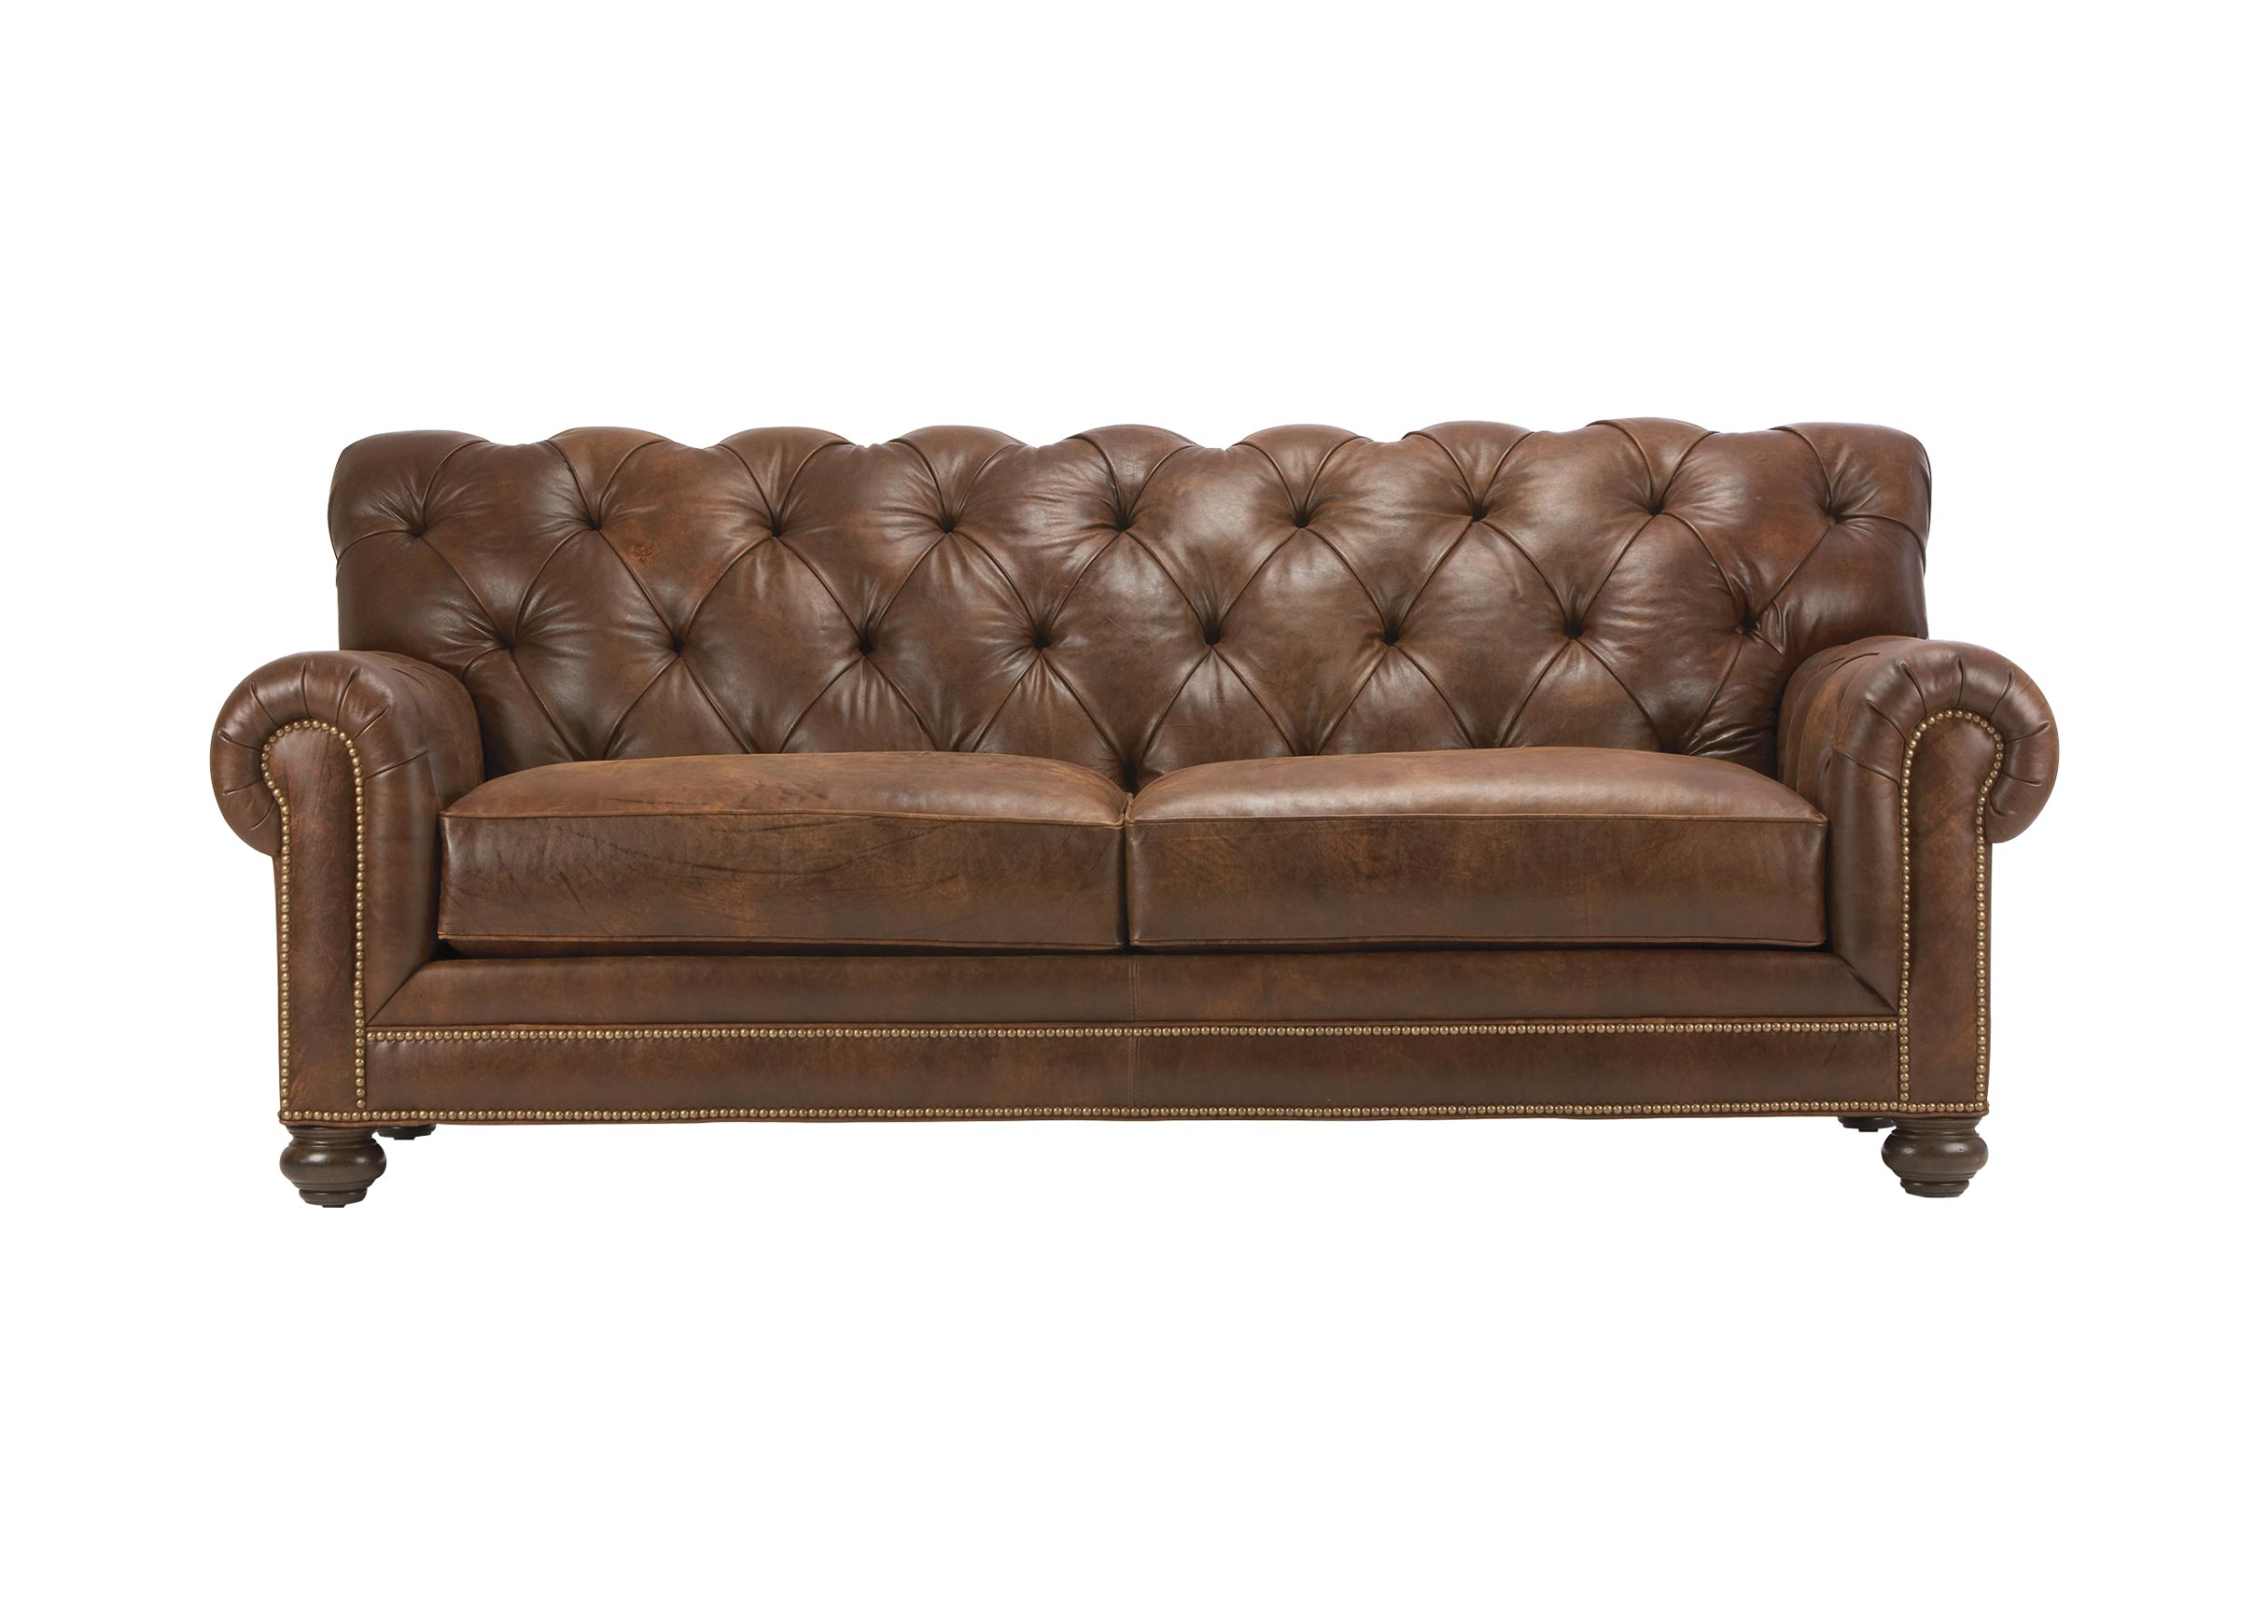 The Stylish Ethan Allen Leather Sofa for your Reference